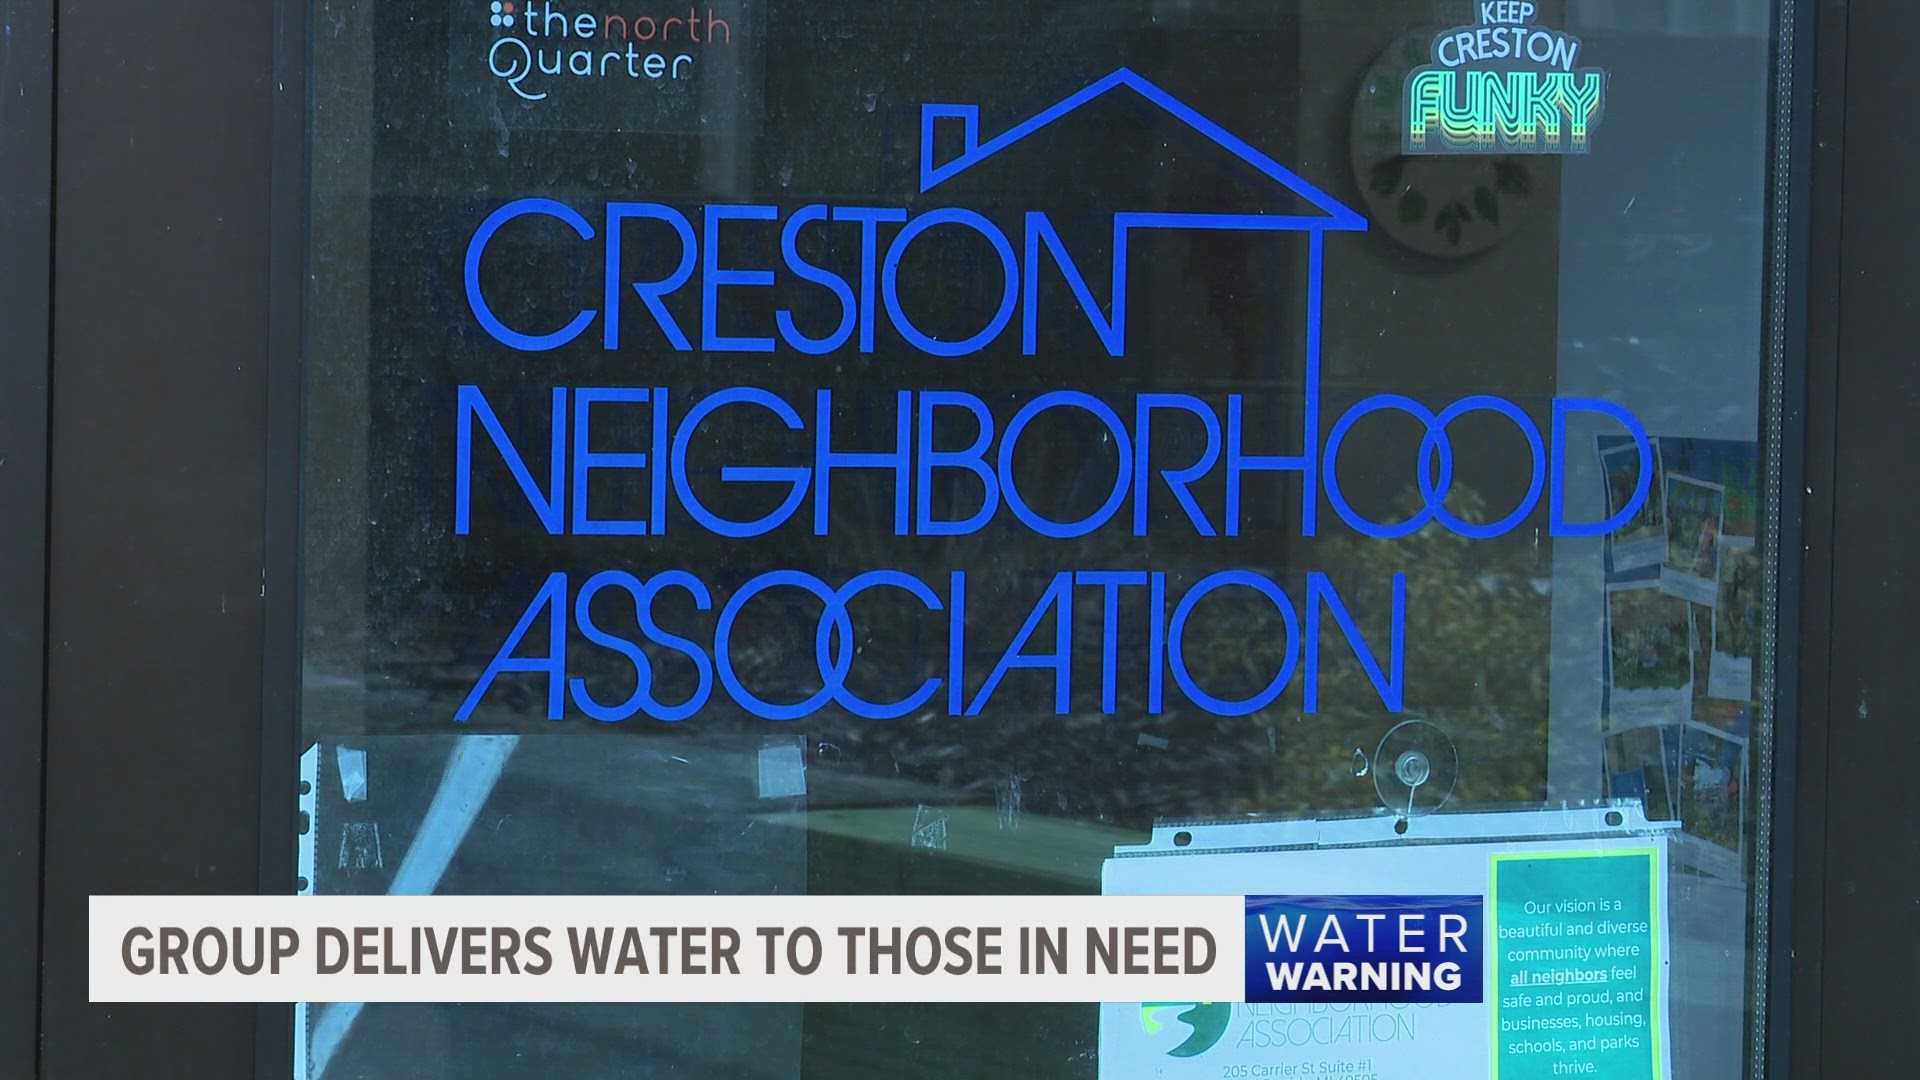 The organization is focusing on those who lack mobility to pick up water from the City of Grand Rapids' water distribution in the wake of the water main break.